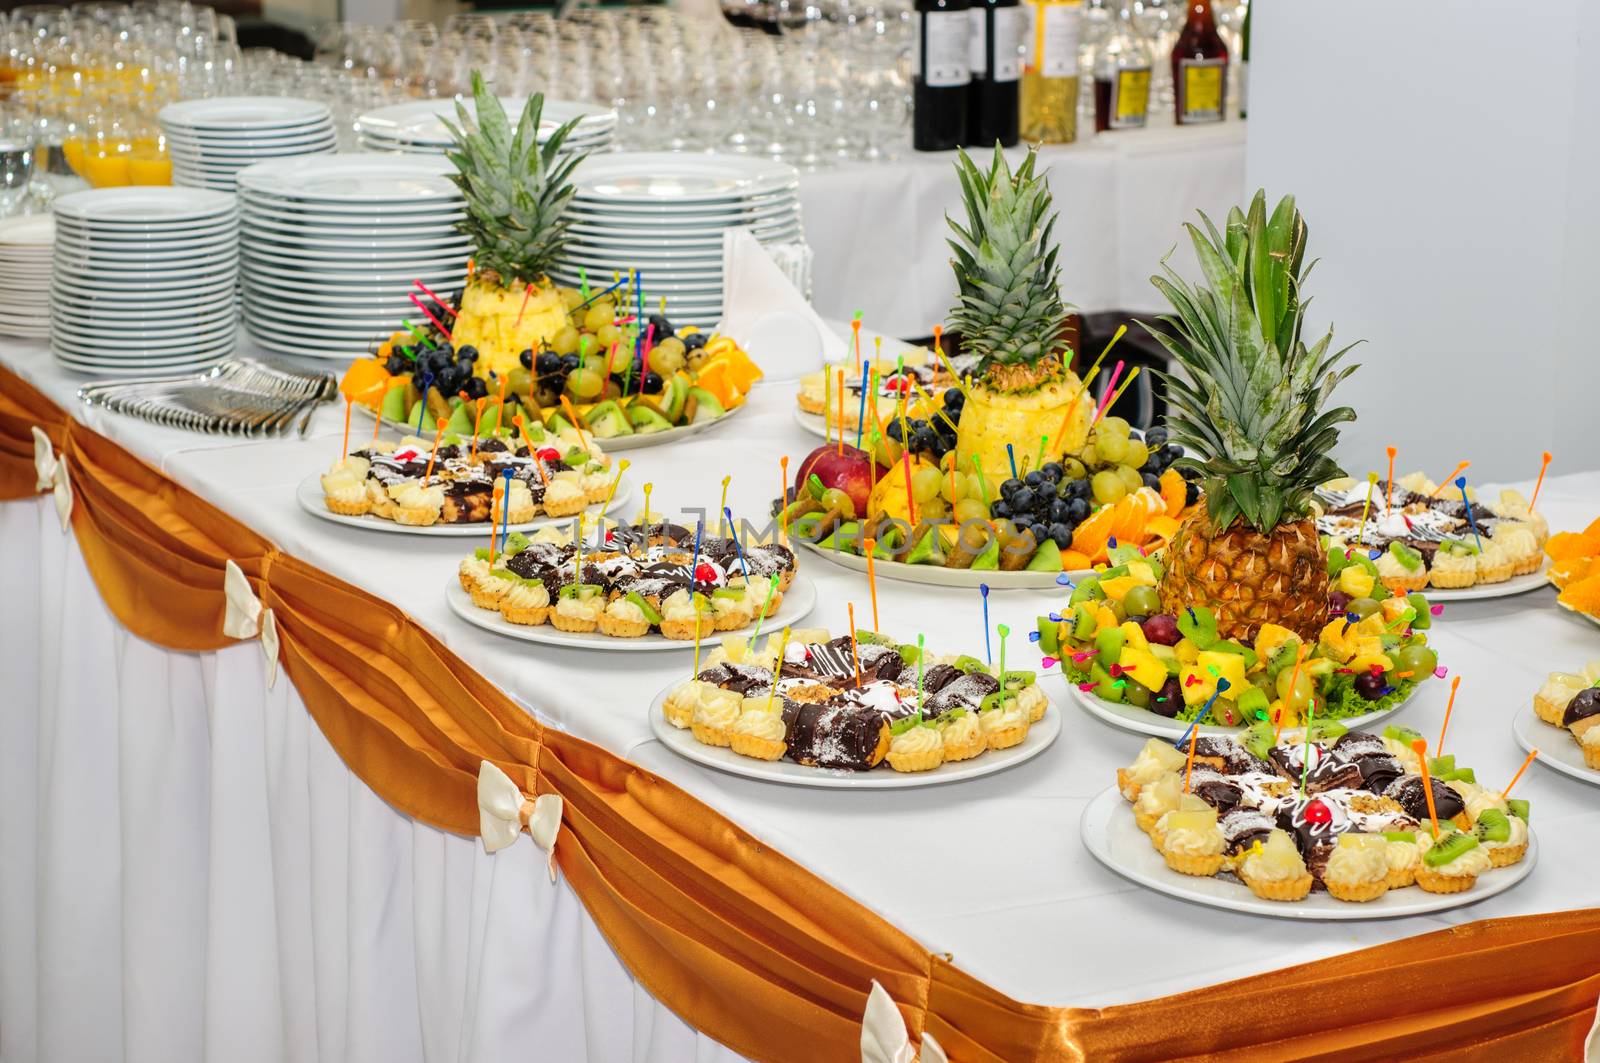 Richly served banquet dessert table with fruits and cakes